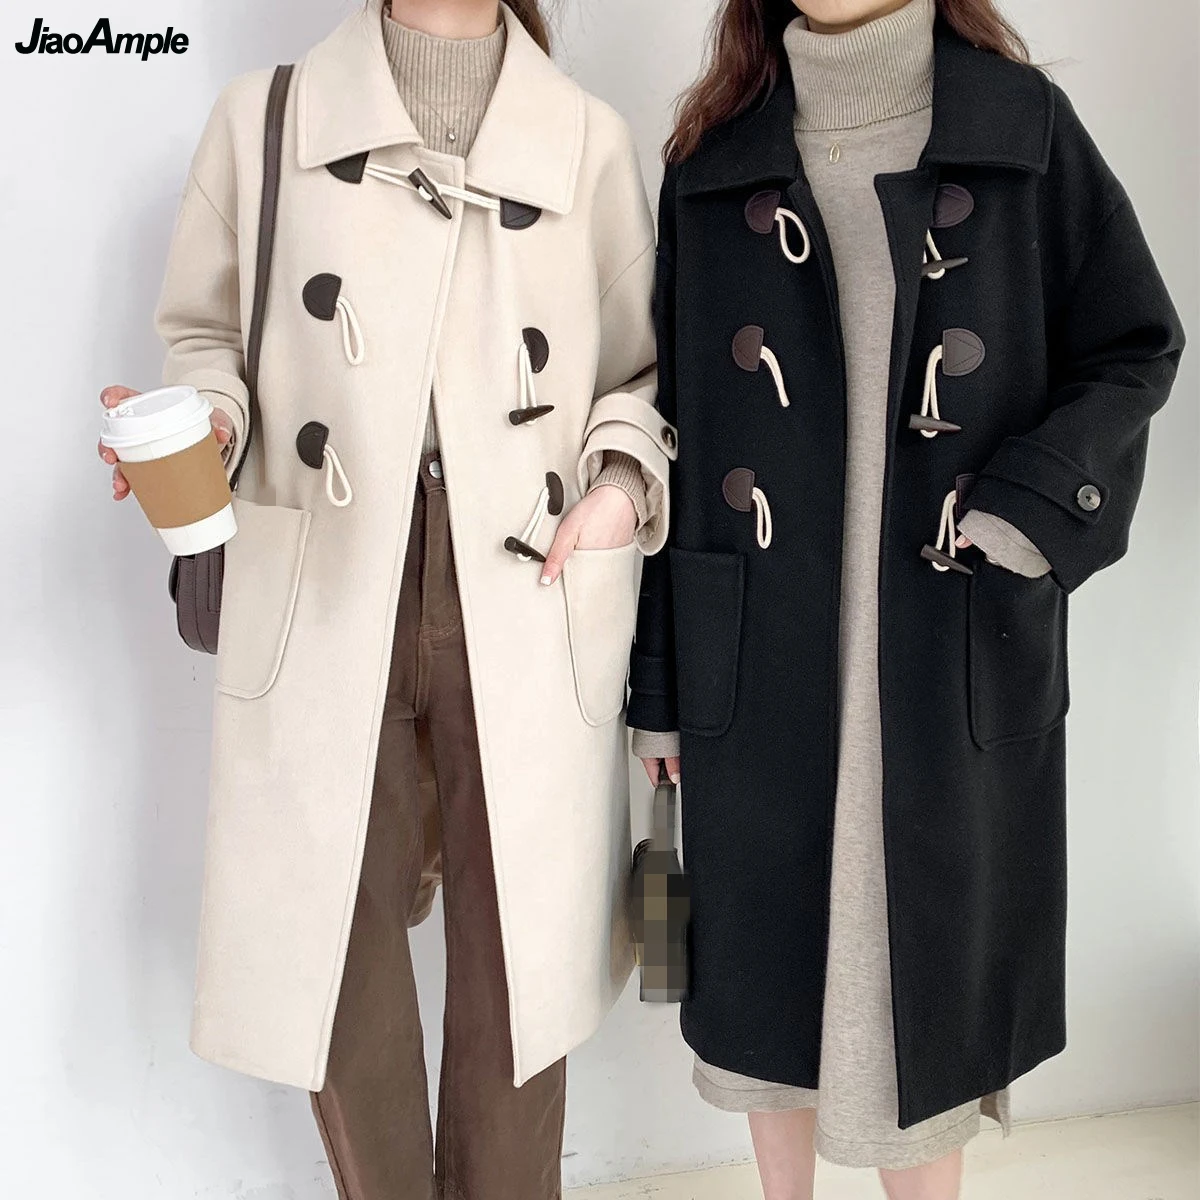 

Autumn Winter Vintage Horn Button Wool Blend Coat Korean Preppy Style Middle-Length Overcoat Black Casual Loose Outerwear Female